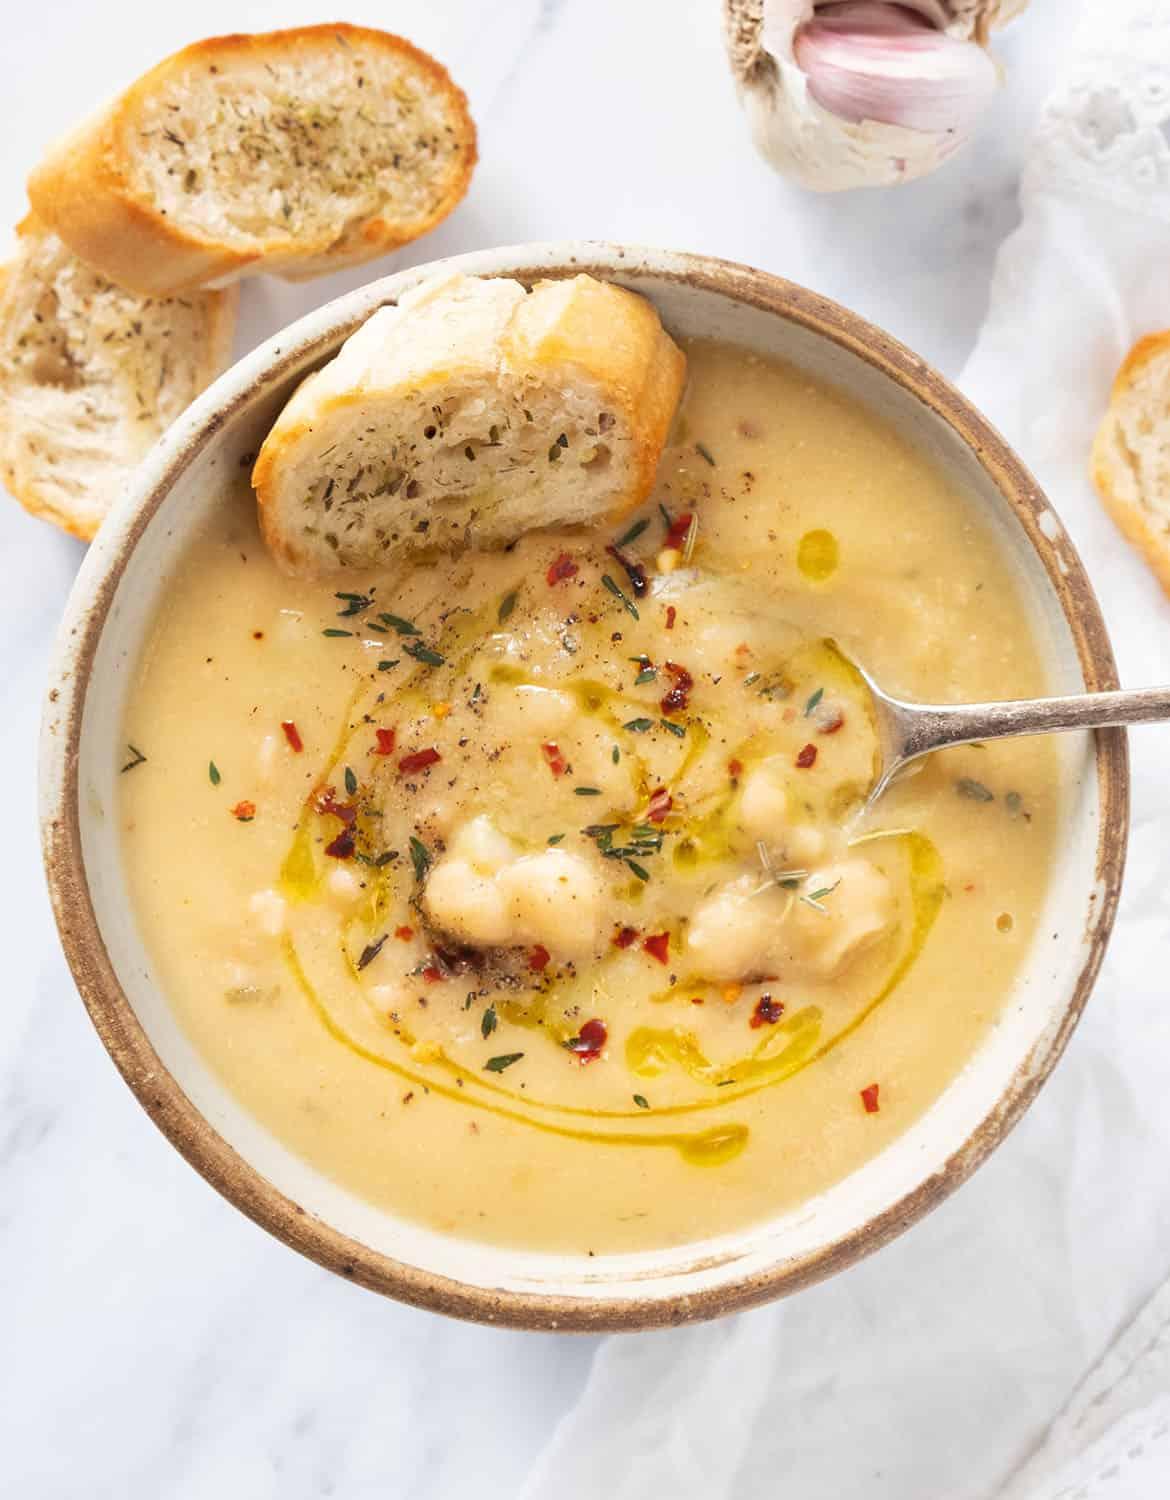 A photo of a bowl of chickpea soup with a spoon in it and bread on the side.